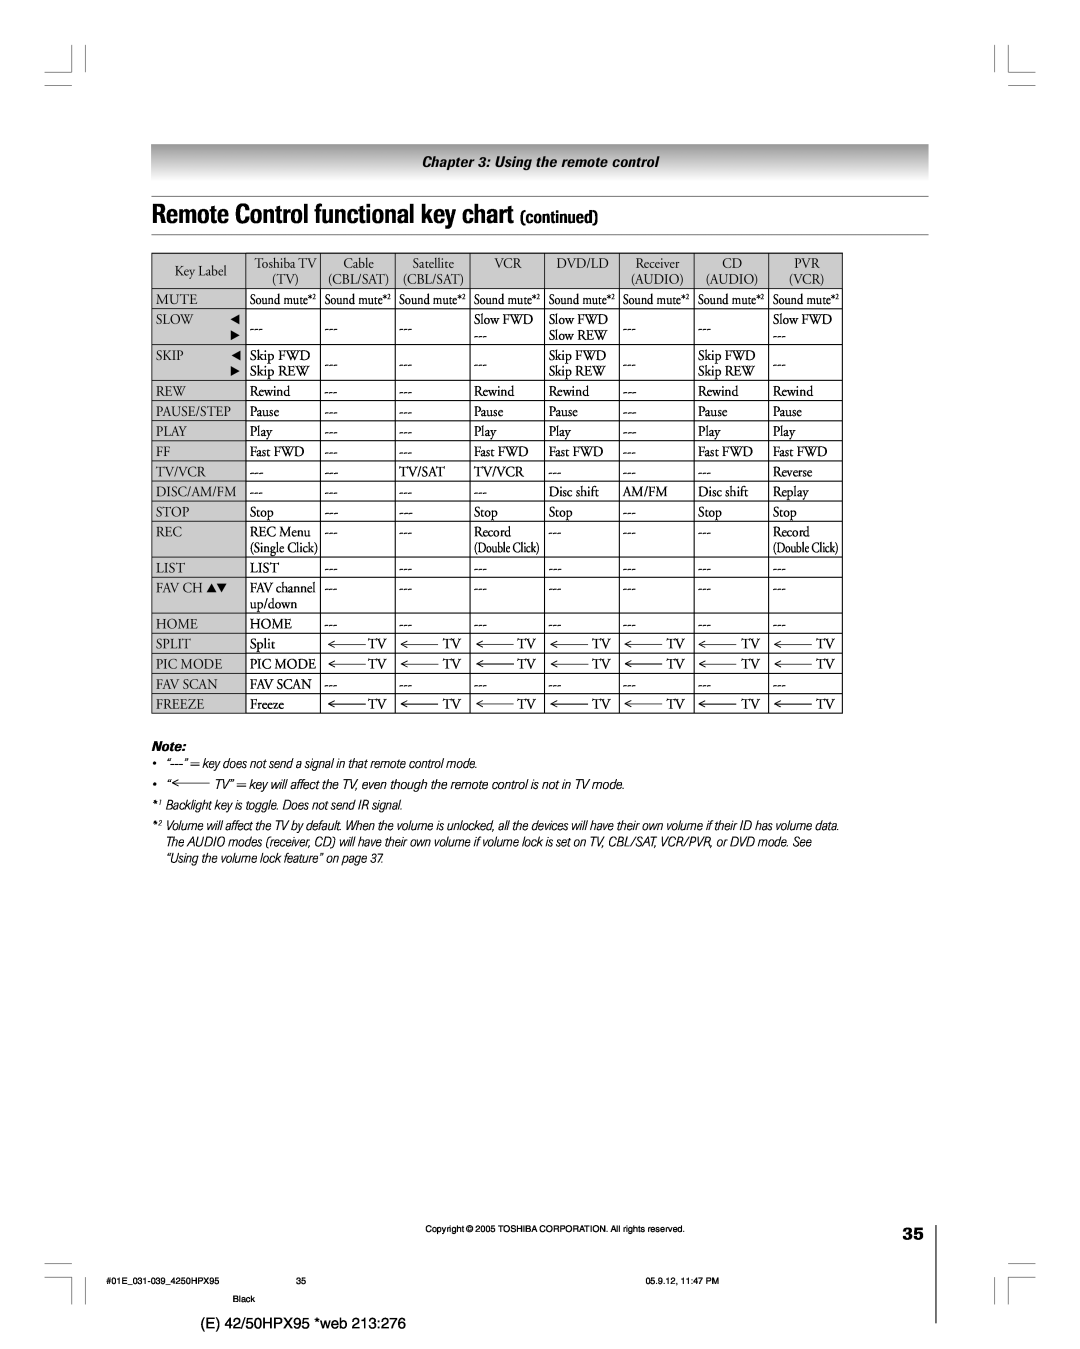 Toshiba 42HPX95 owner manual Remote Control functional key chart continued, Using the remote control 